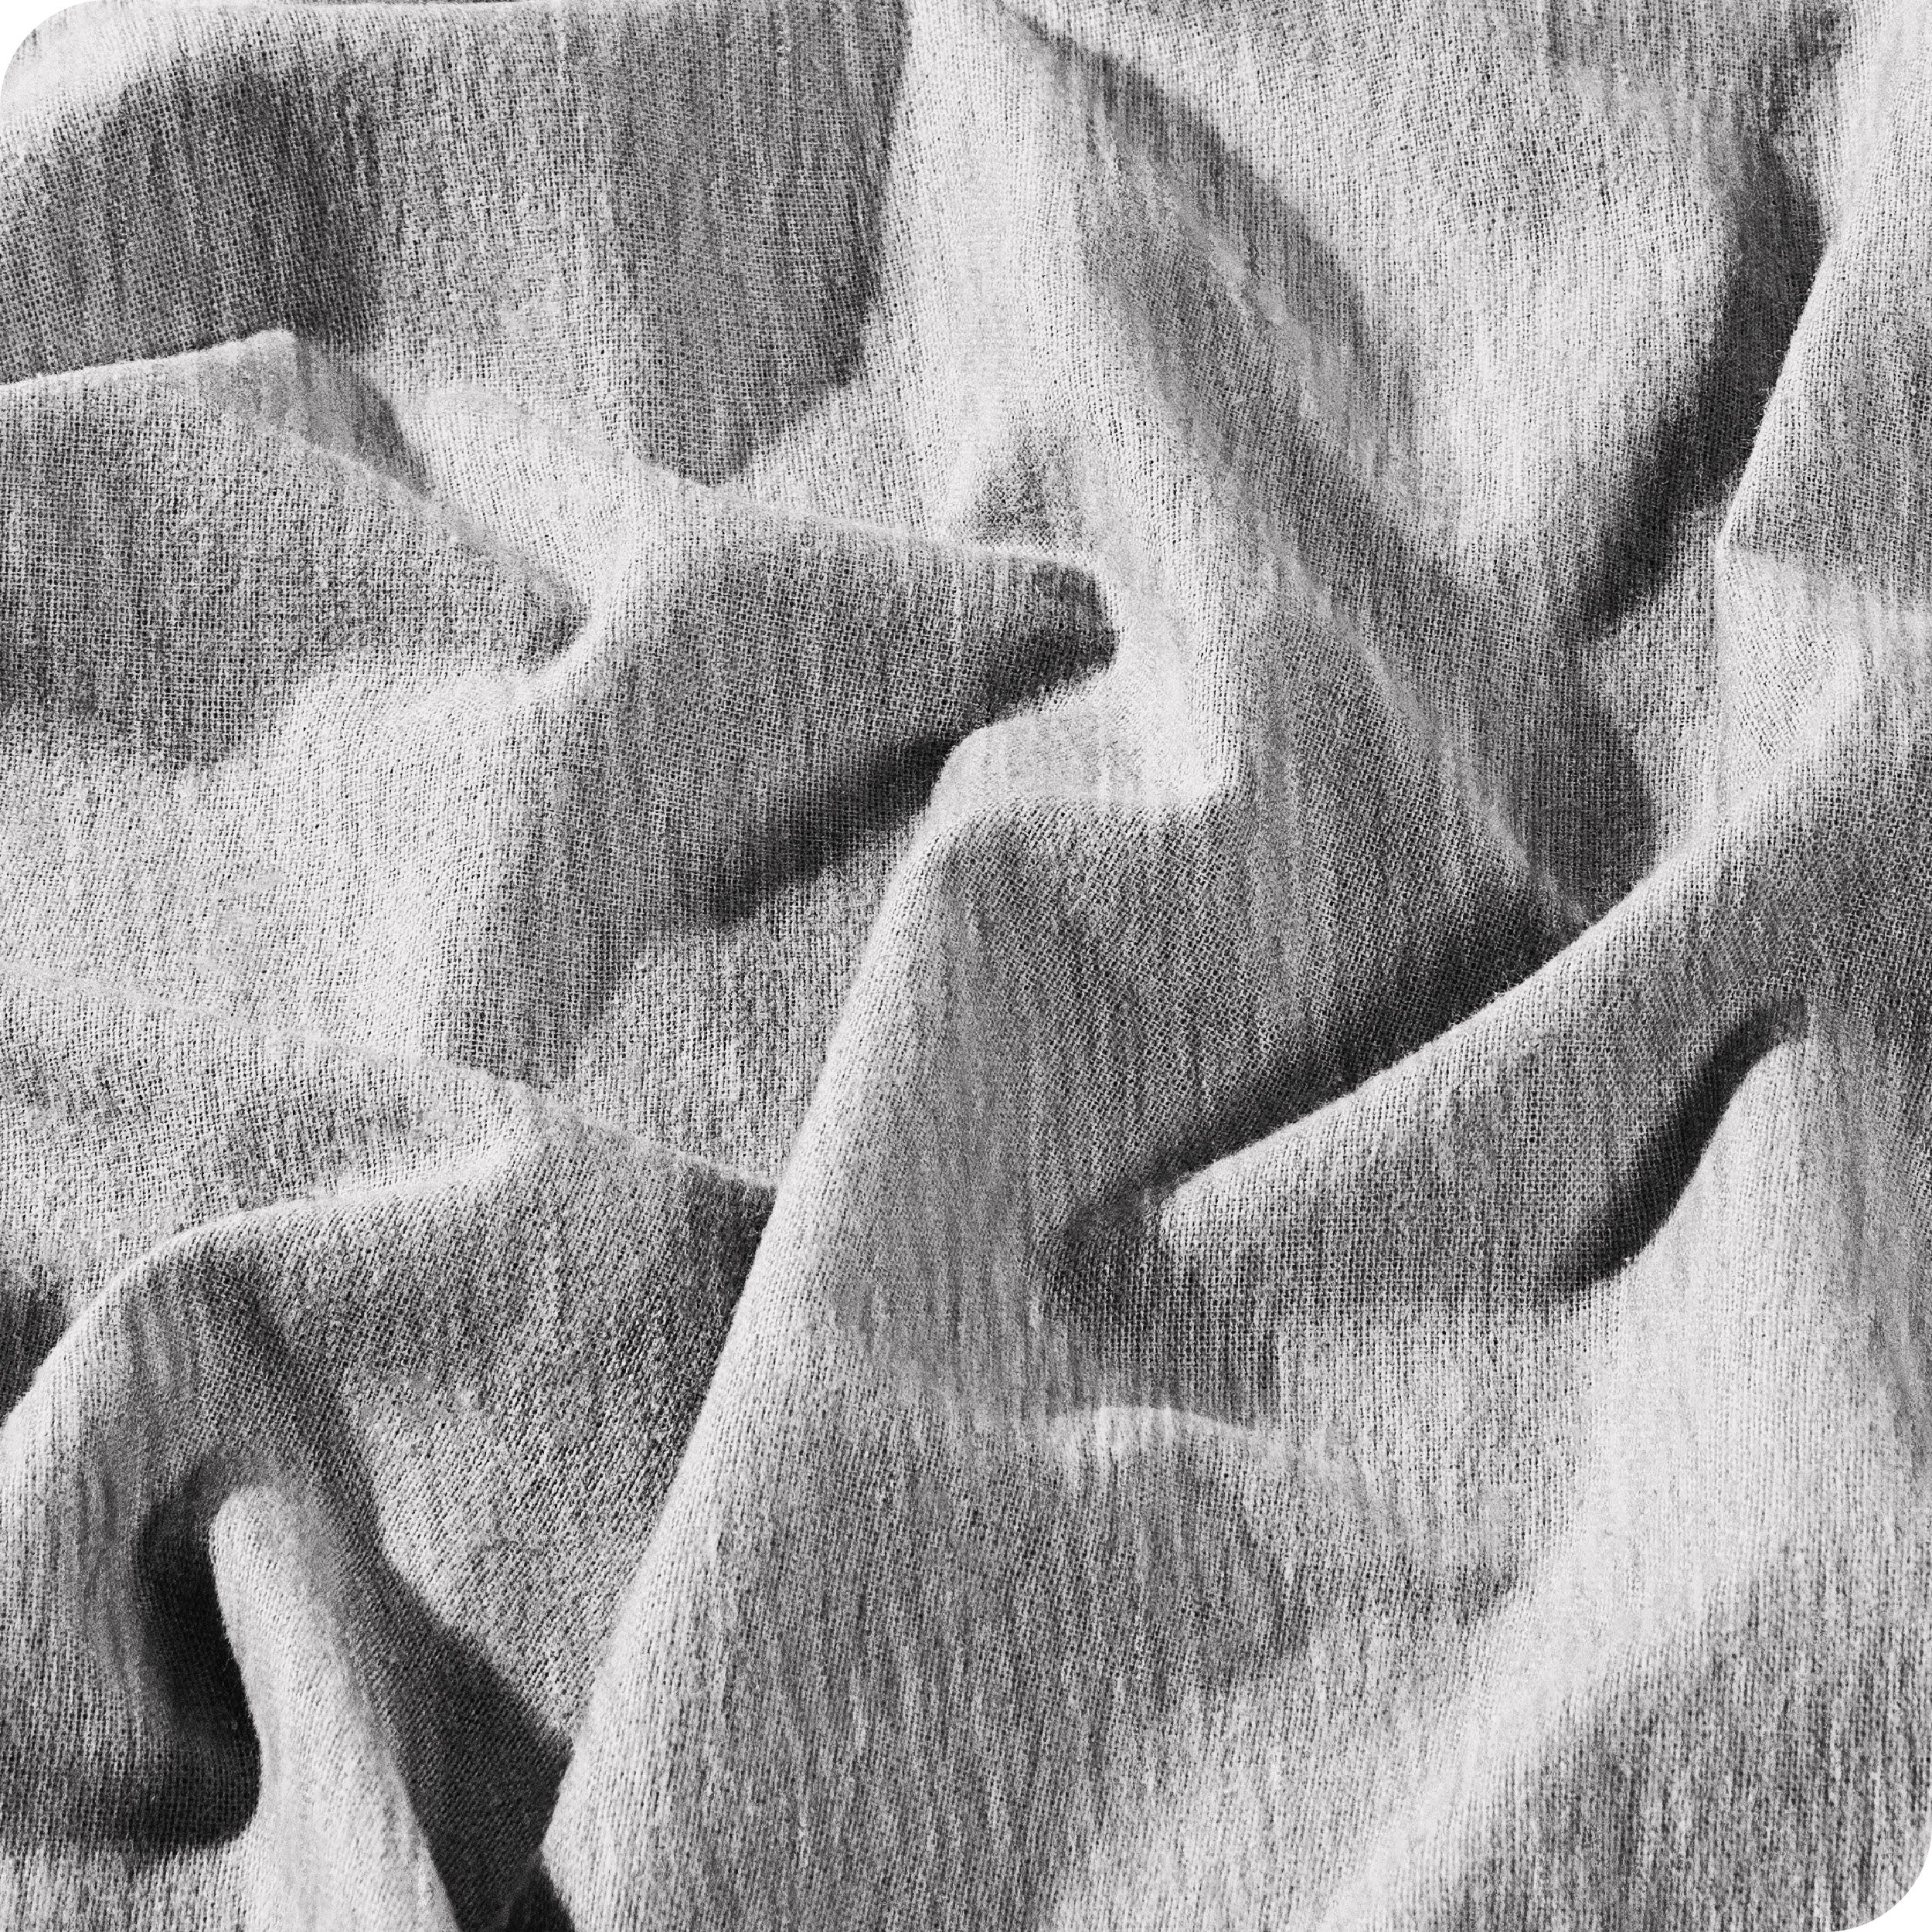 Close up of the texture of the flannel duvet cover fabric